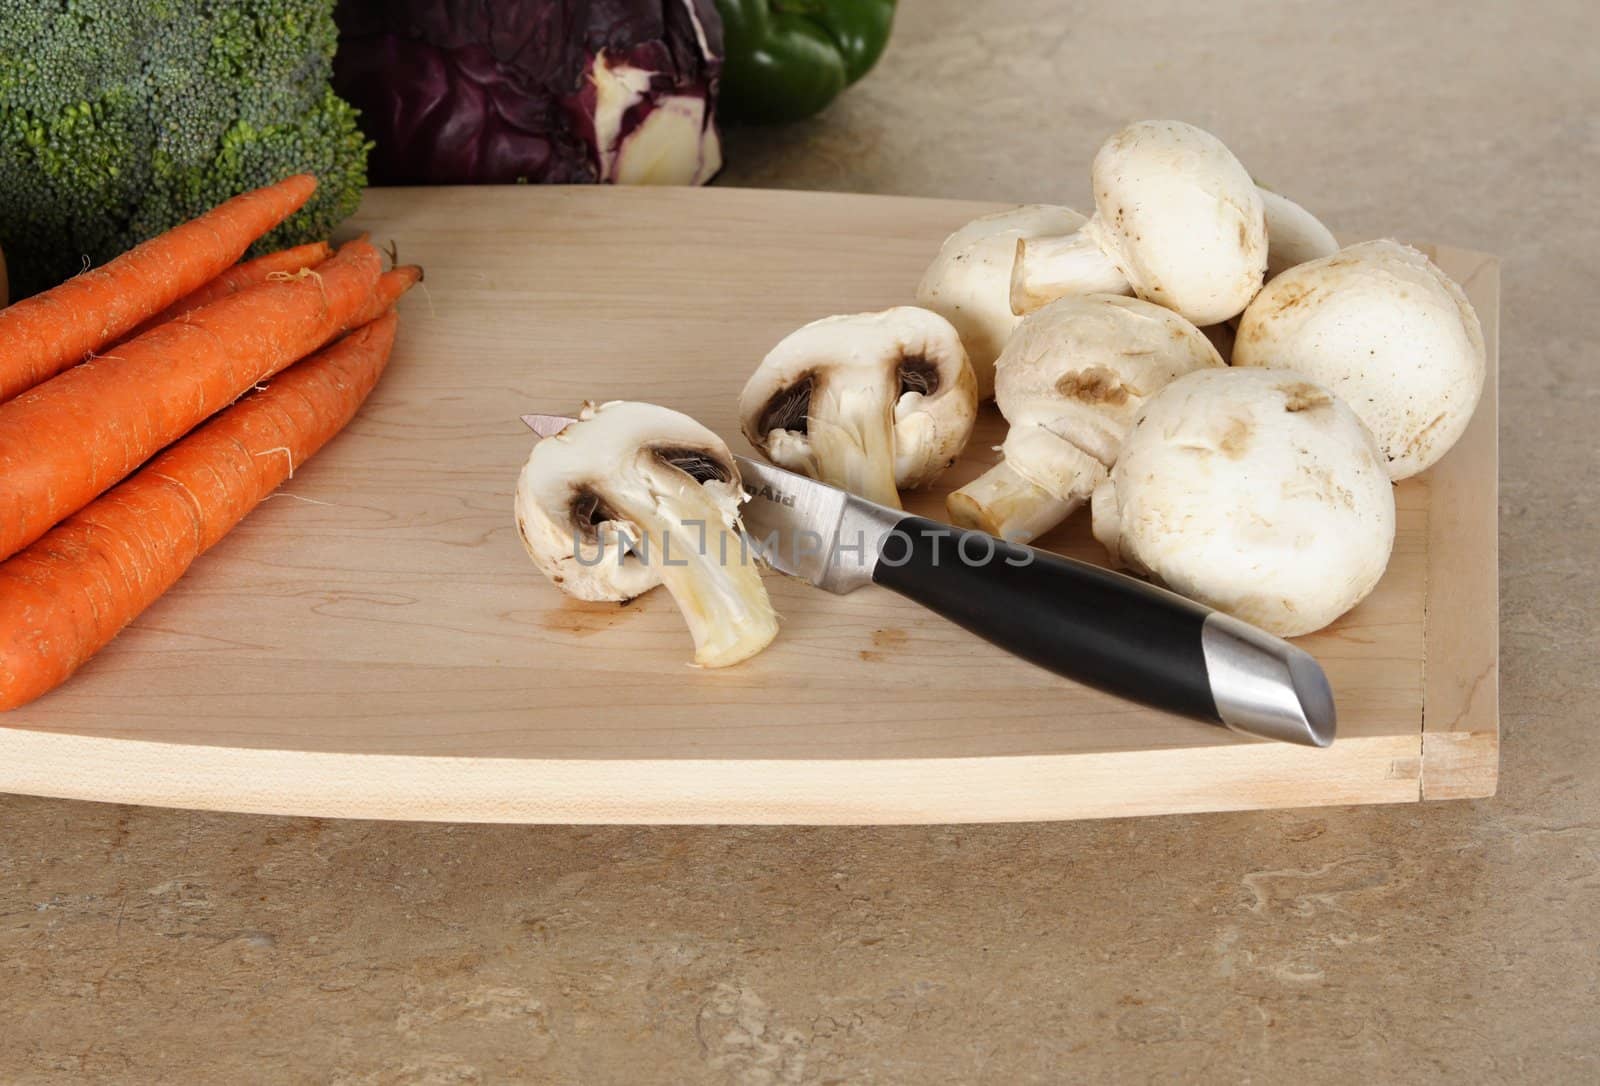 mushroom on wood cutting board, with some other vegetable on background